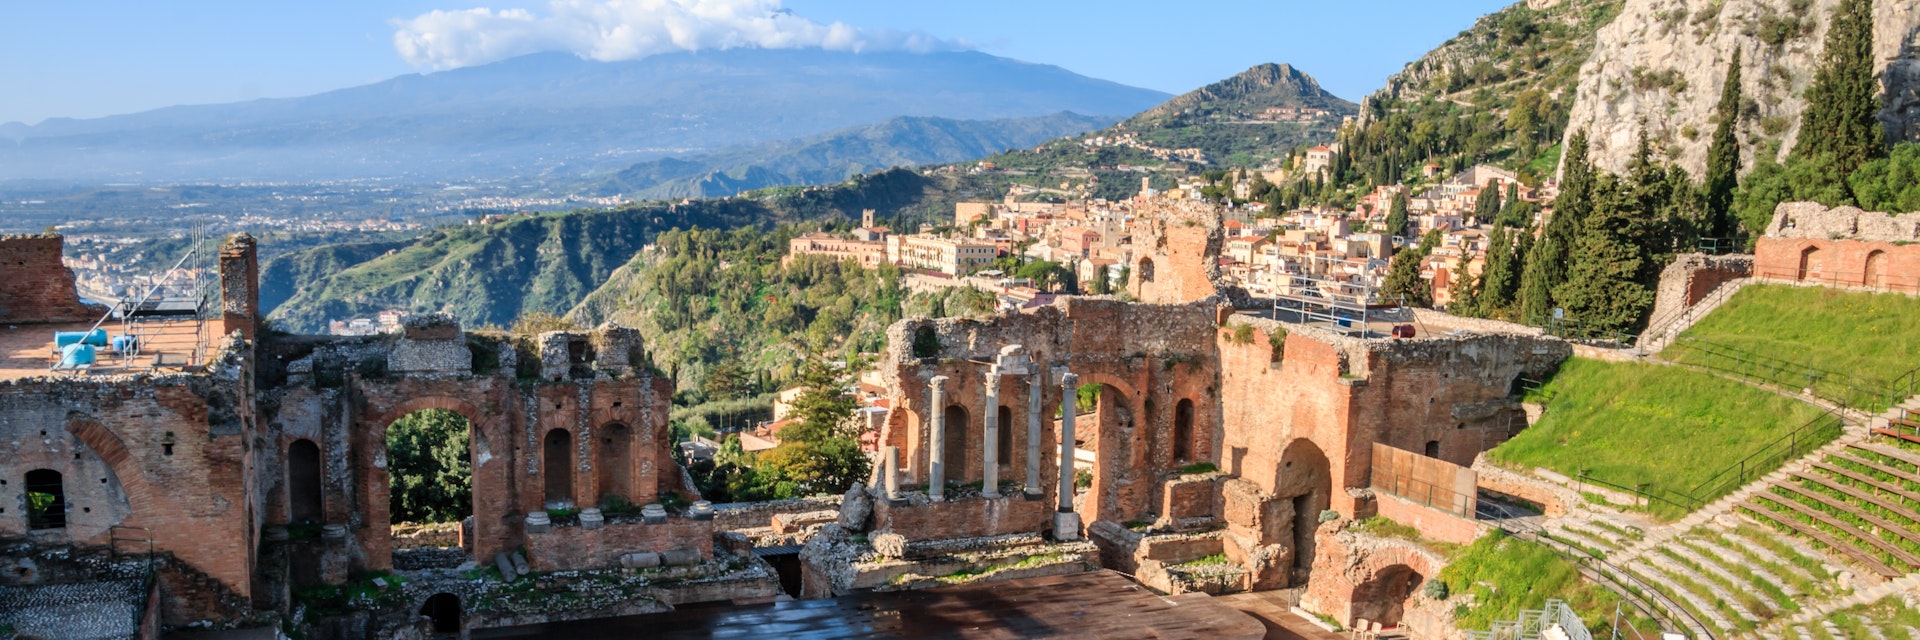 The Greek theatre (Teatro Greco) and Mount Etna, Taormina, Sicily; The Greek theatre with smoking Mount Etna volcano in the background, Taormina, Sicily, Italy